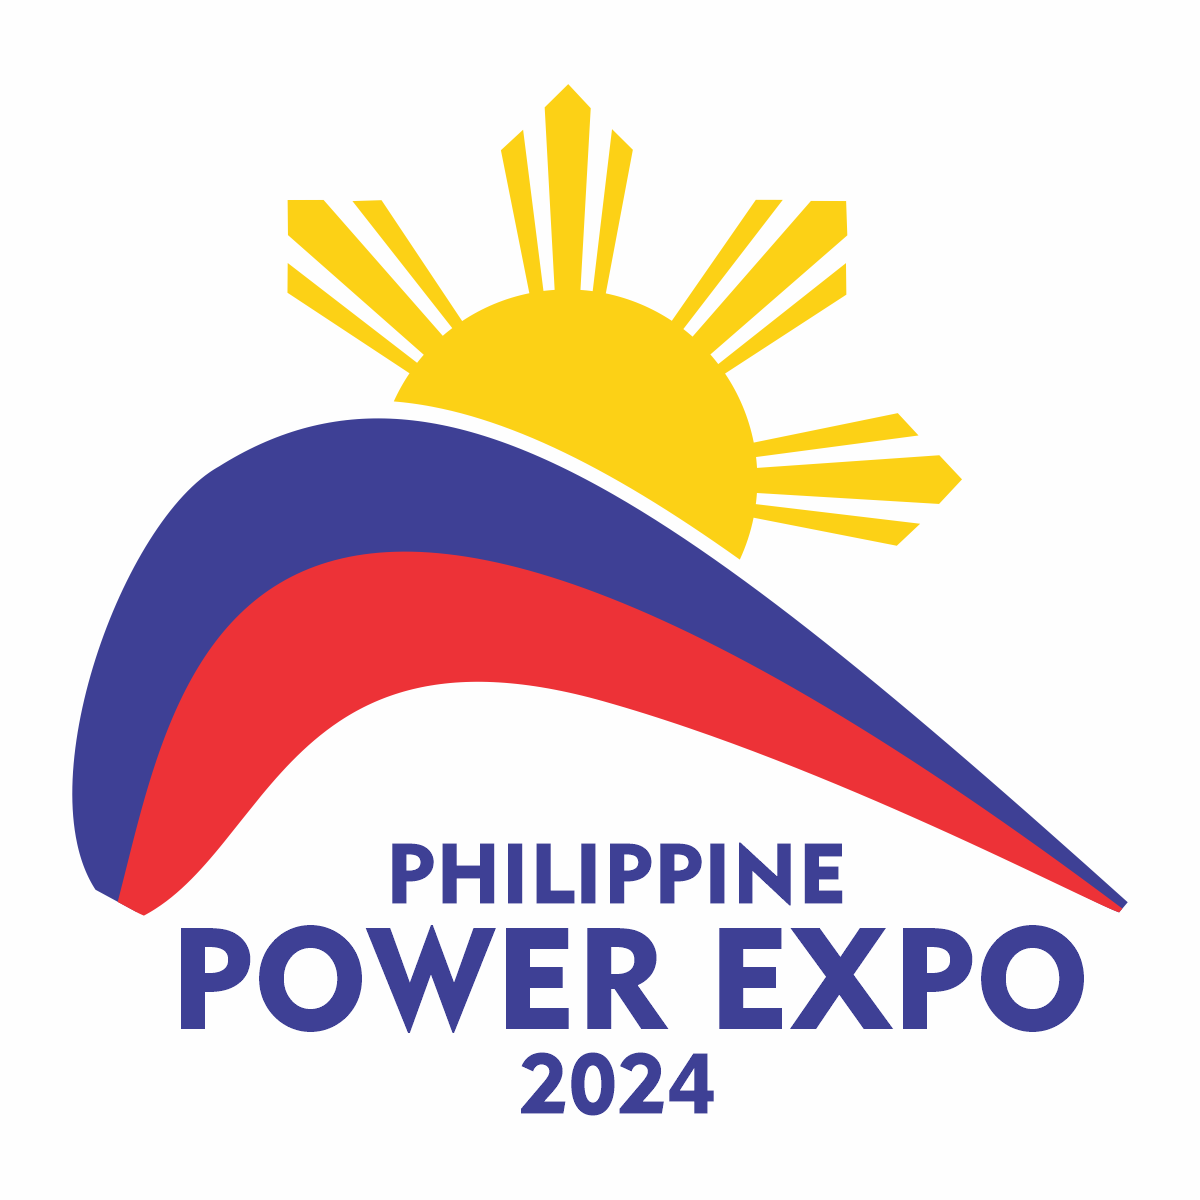 Welcome! About the Philippine Power Expo